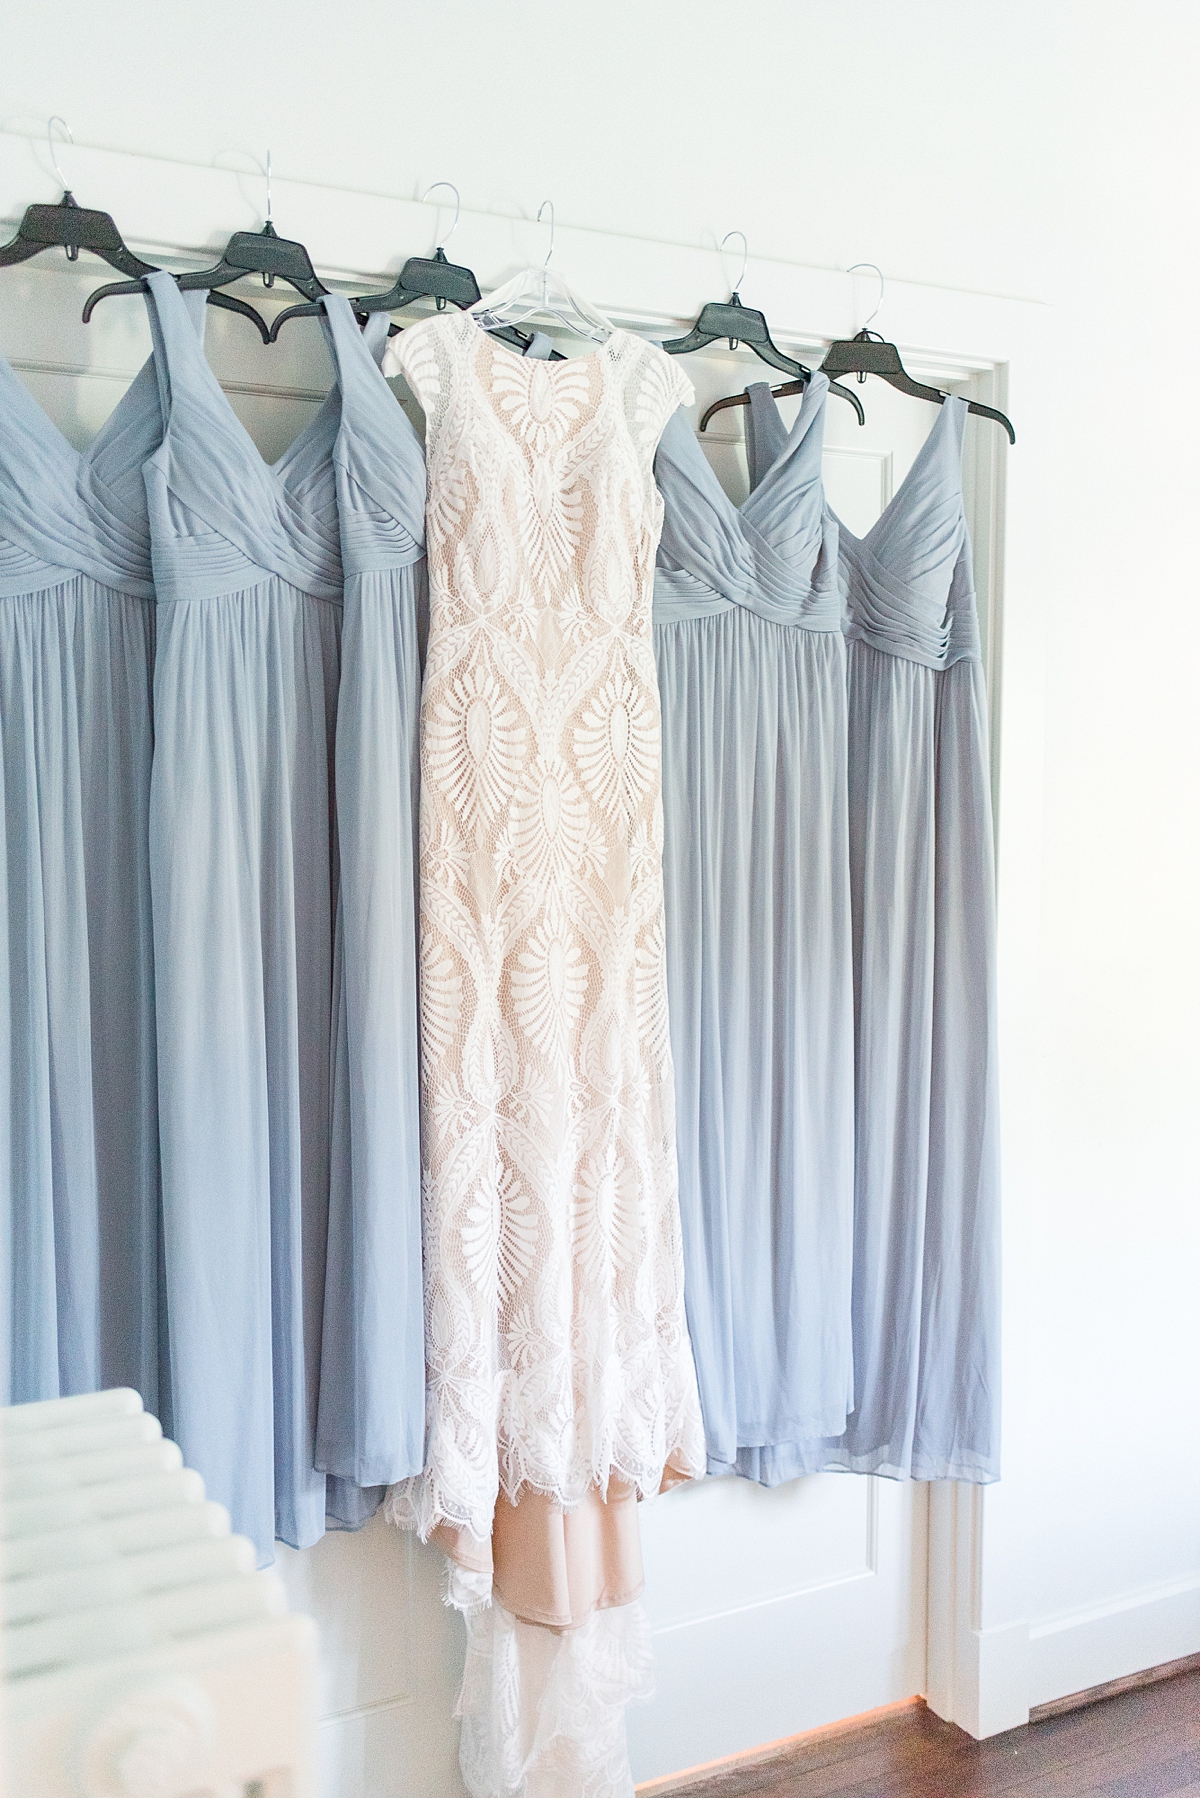 Wedding Dress and Bridesmaid Dresses Bridal Details at Virginia House Fall Wedding. Wedding Photography by Richmond Wedding Photographer Kailey Brianne Photography. 